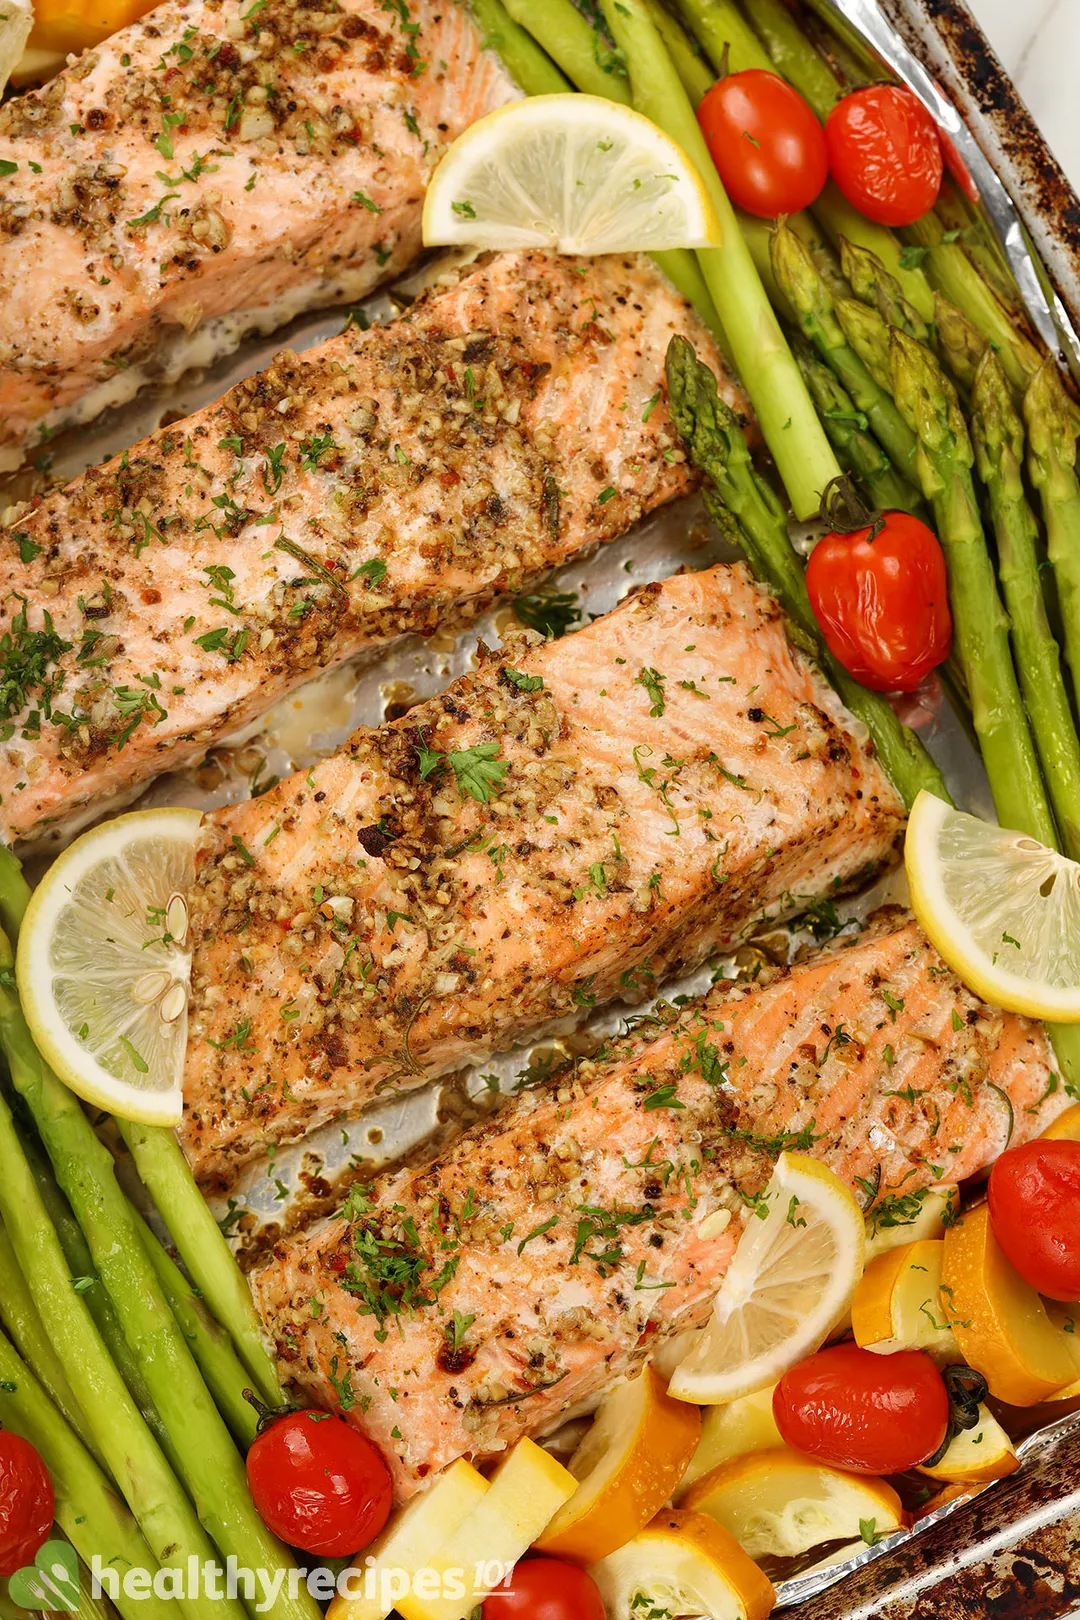 four baked salmon fillets on a tray with asparagus, tomatoes, lemon slices